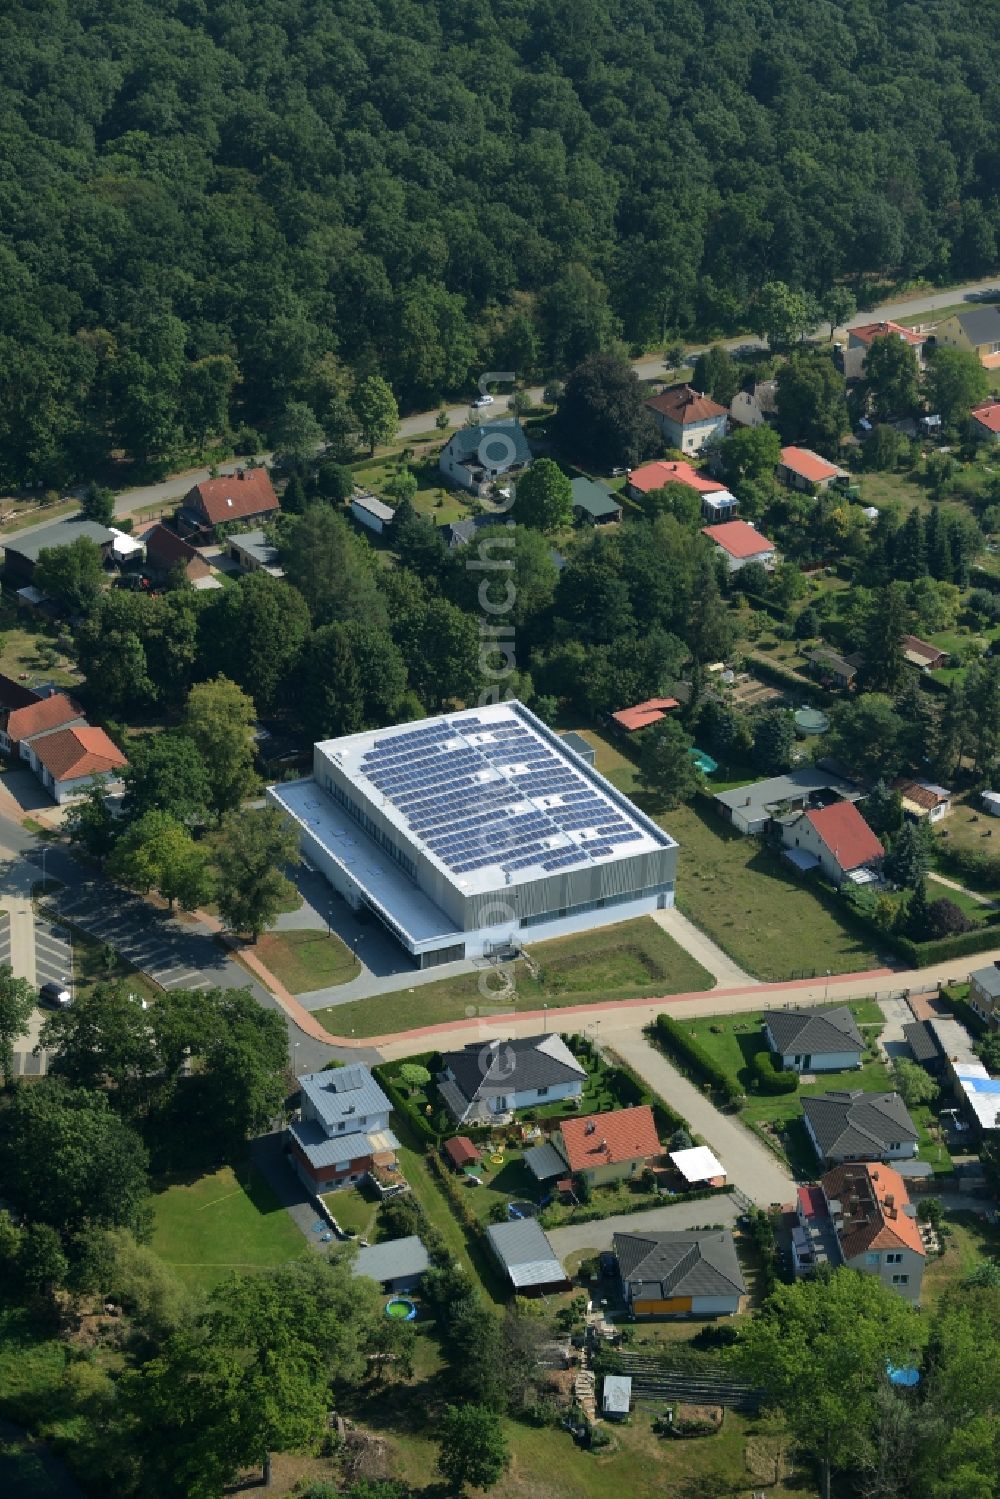 Aerial photograph Grünheide (Mark) - Building of the sports and multi-functional hall Mueggelspreehalle in the Hangelsberg part of Gruenheide (Mark) in the state of Brandenburg. The architectural distinct hall is used for sports events and is the home pitch of SG Hangelsberg 47 e.V